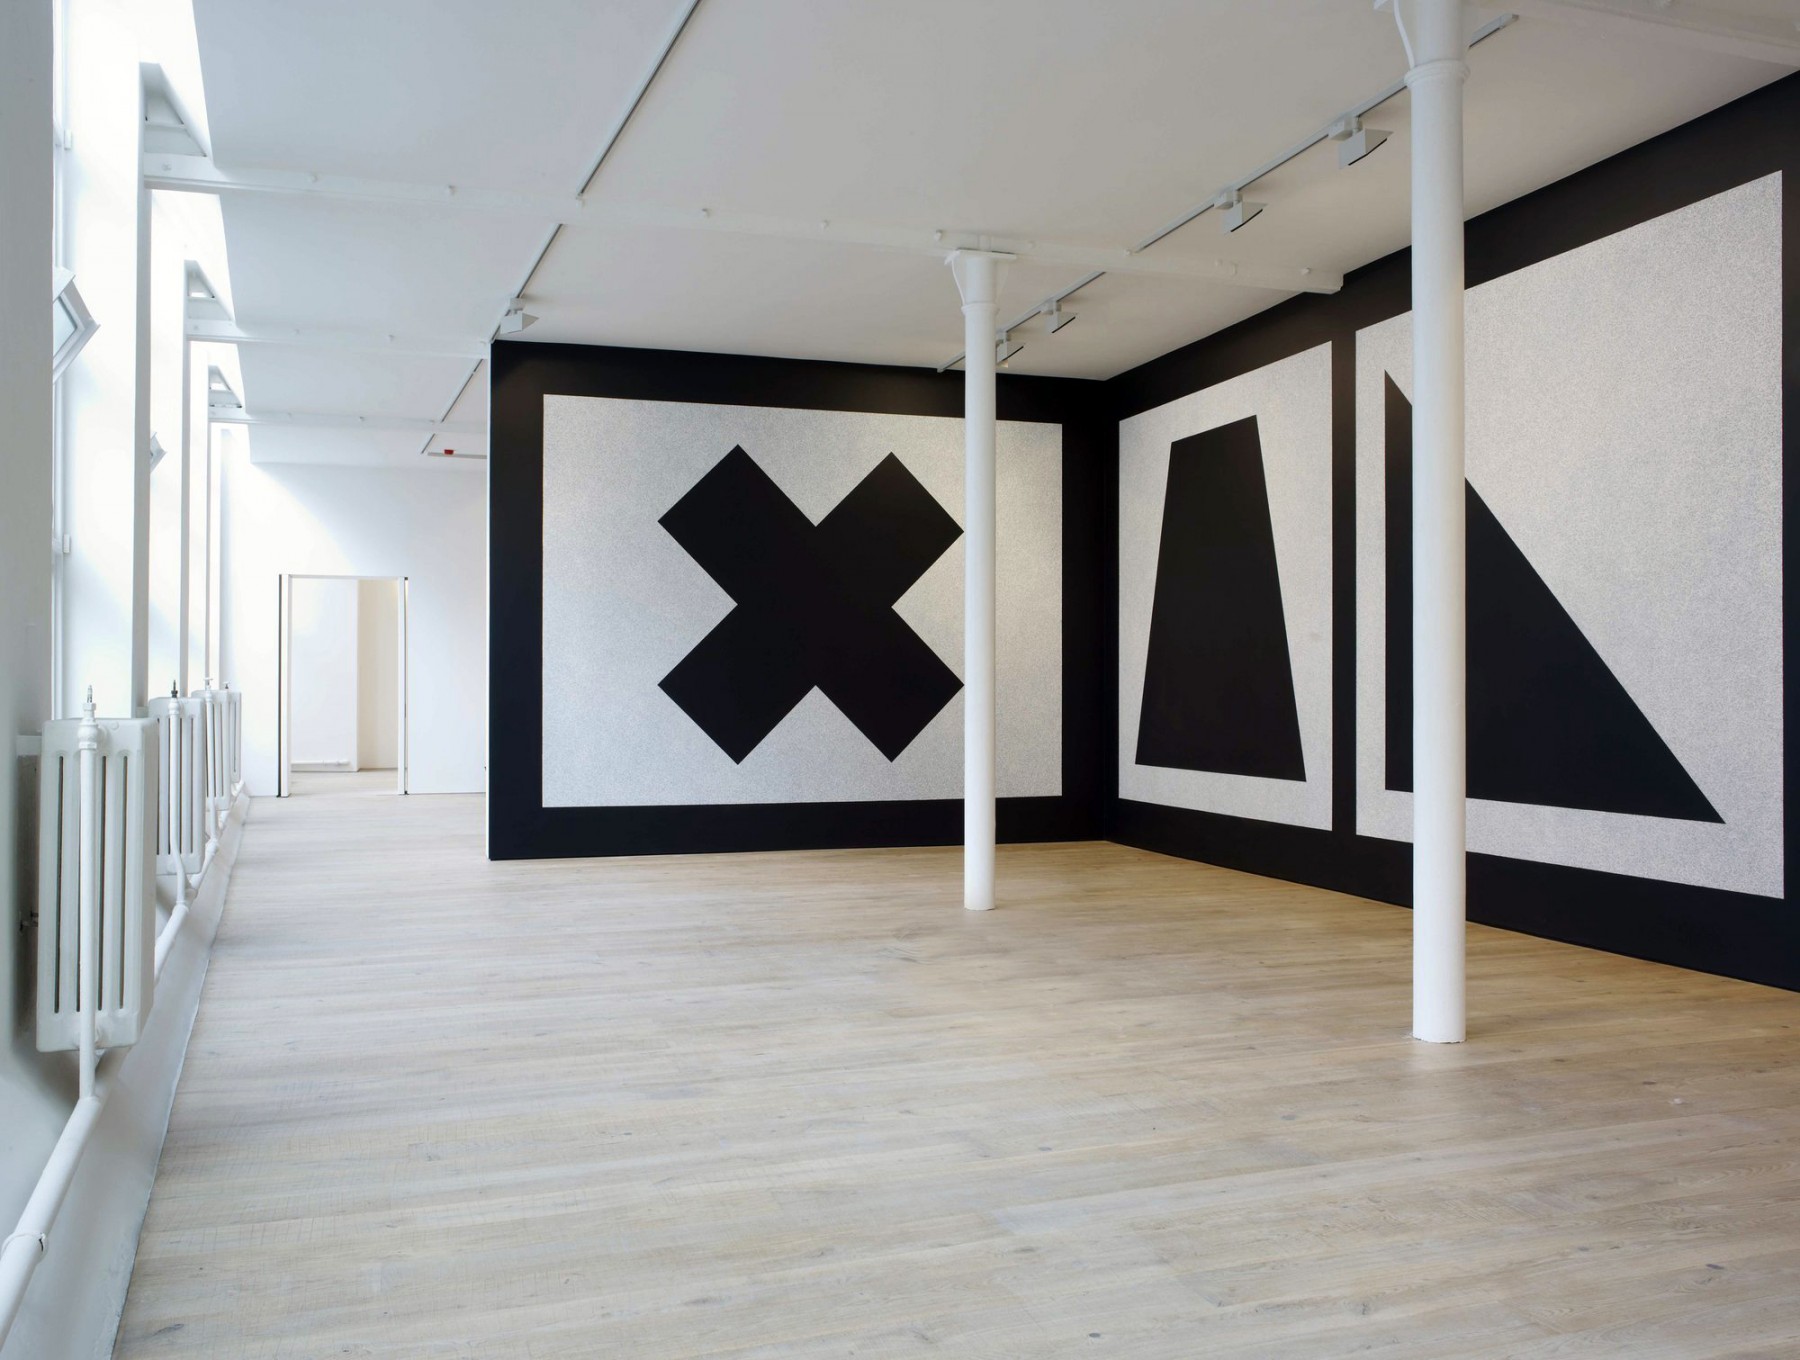 new-Pace-Gallery-London-soho-2011-contemporary-art-international-exhibition-space-installation-Sol-Le-Witt-Wall-Drawing-343-Jamie-Fobert-Architects-1